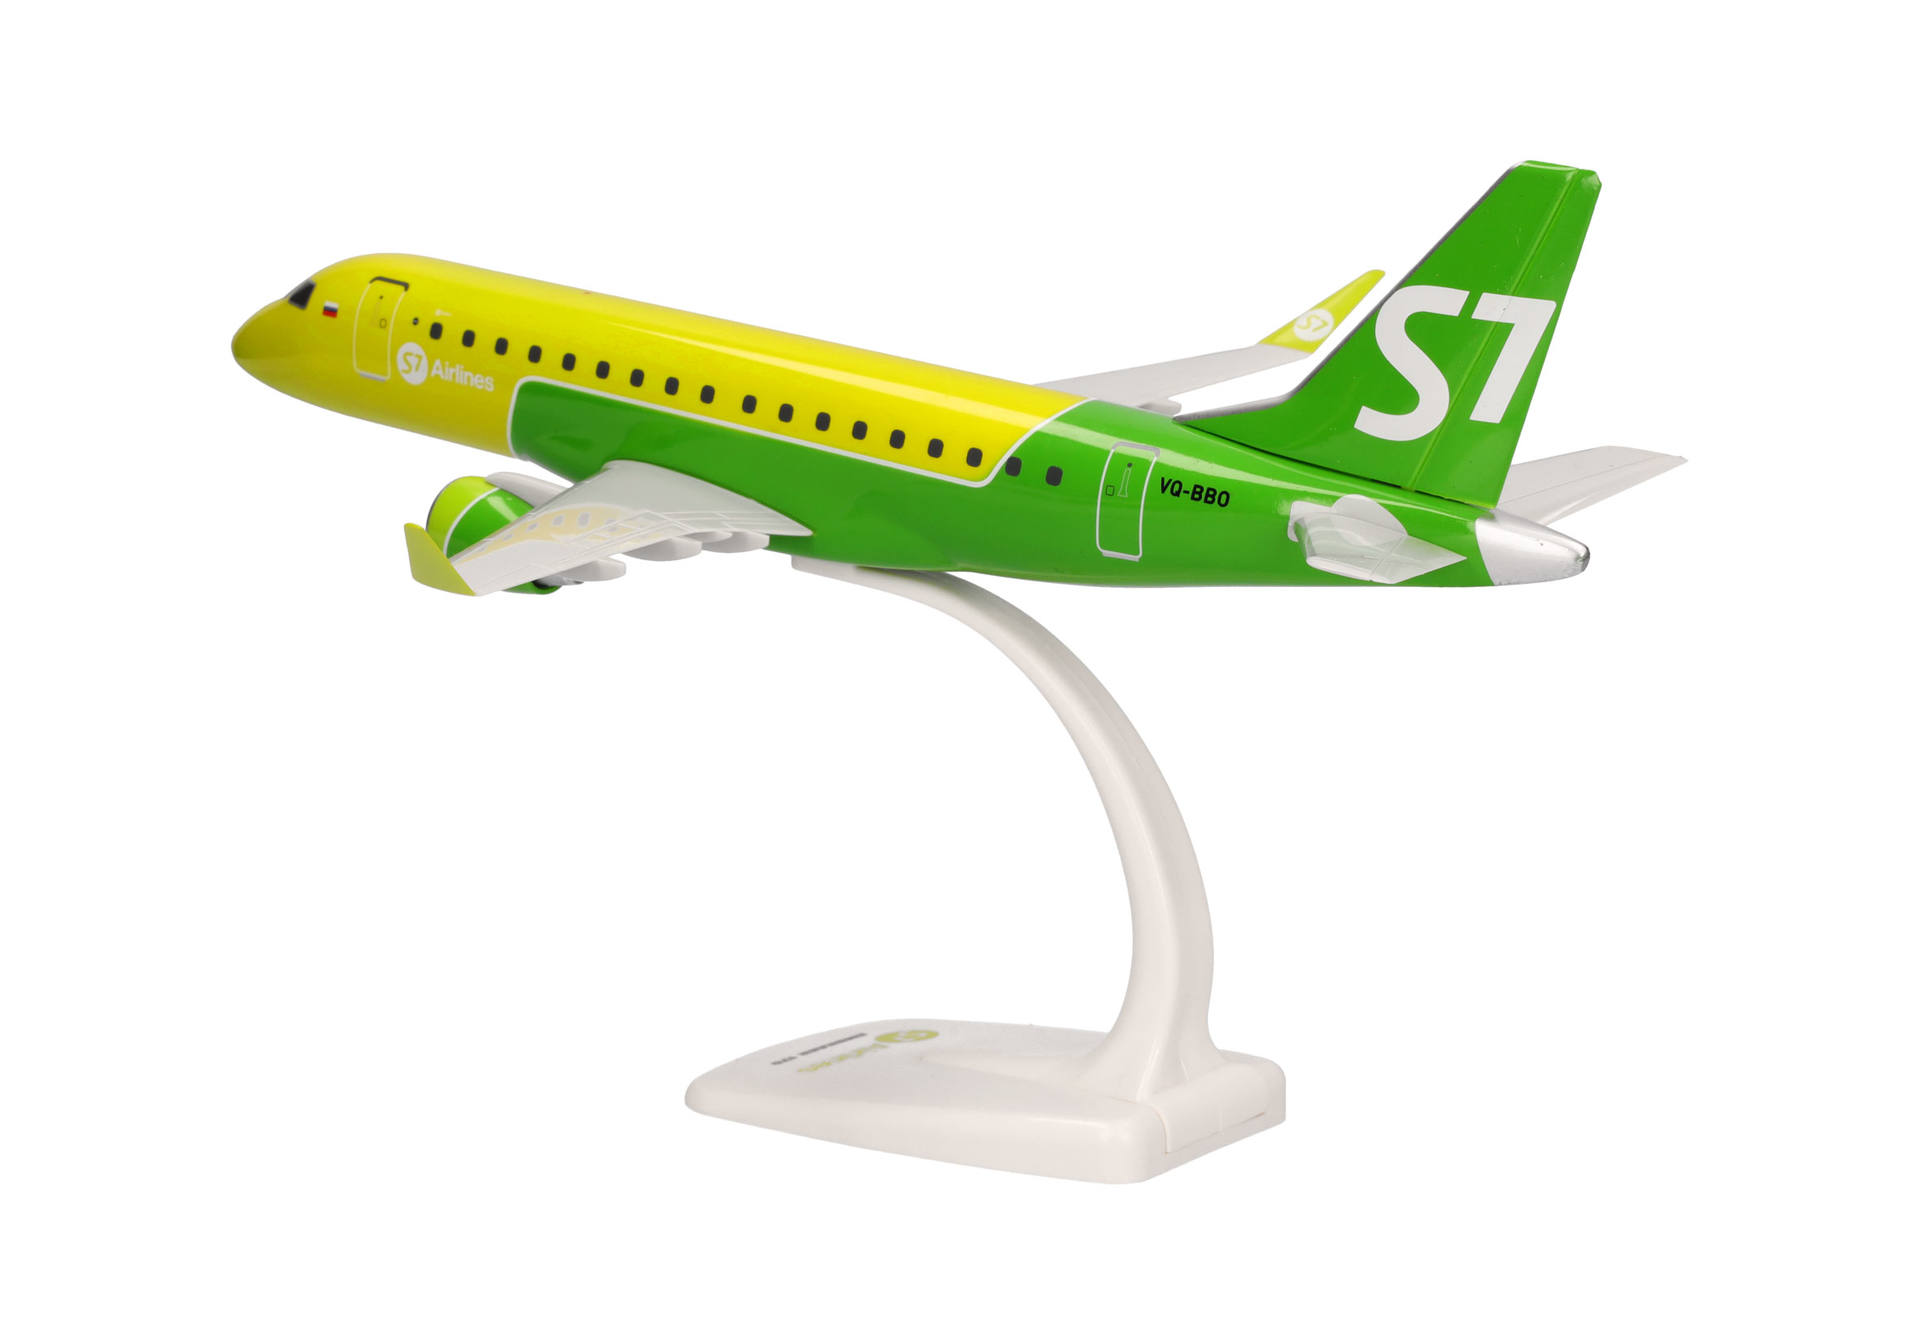 S7 Airlines Embraer E170